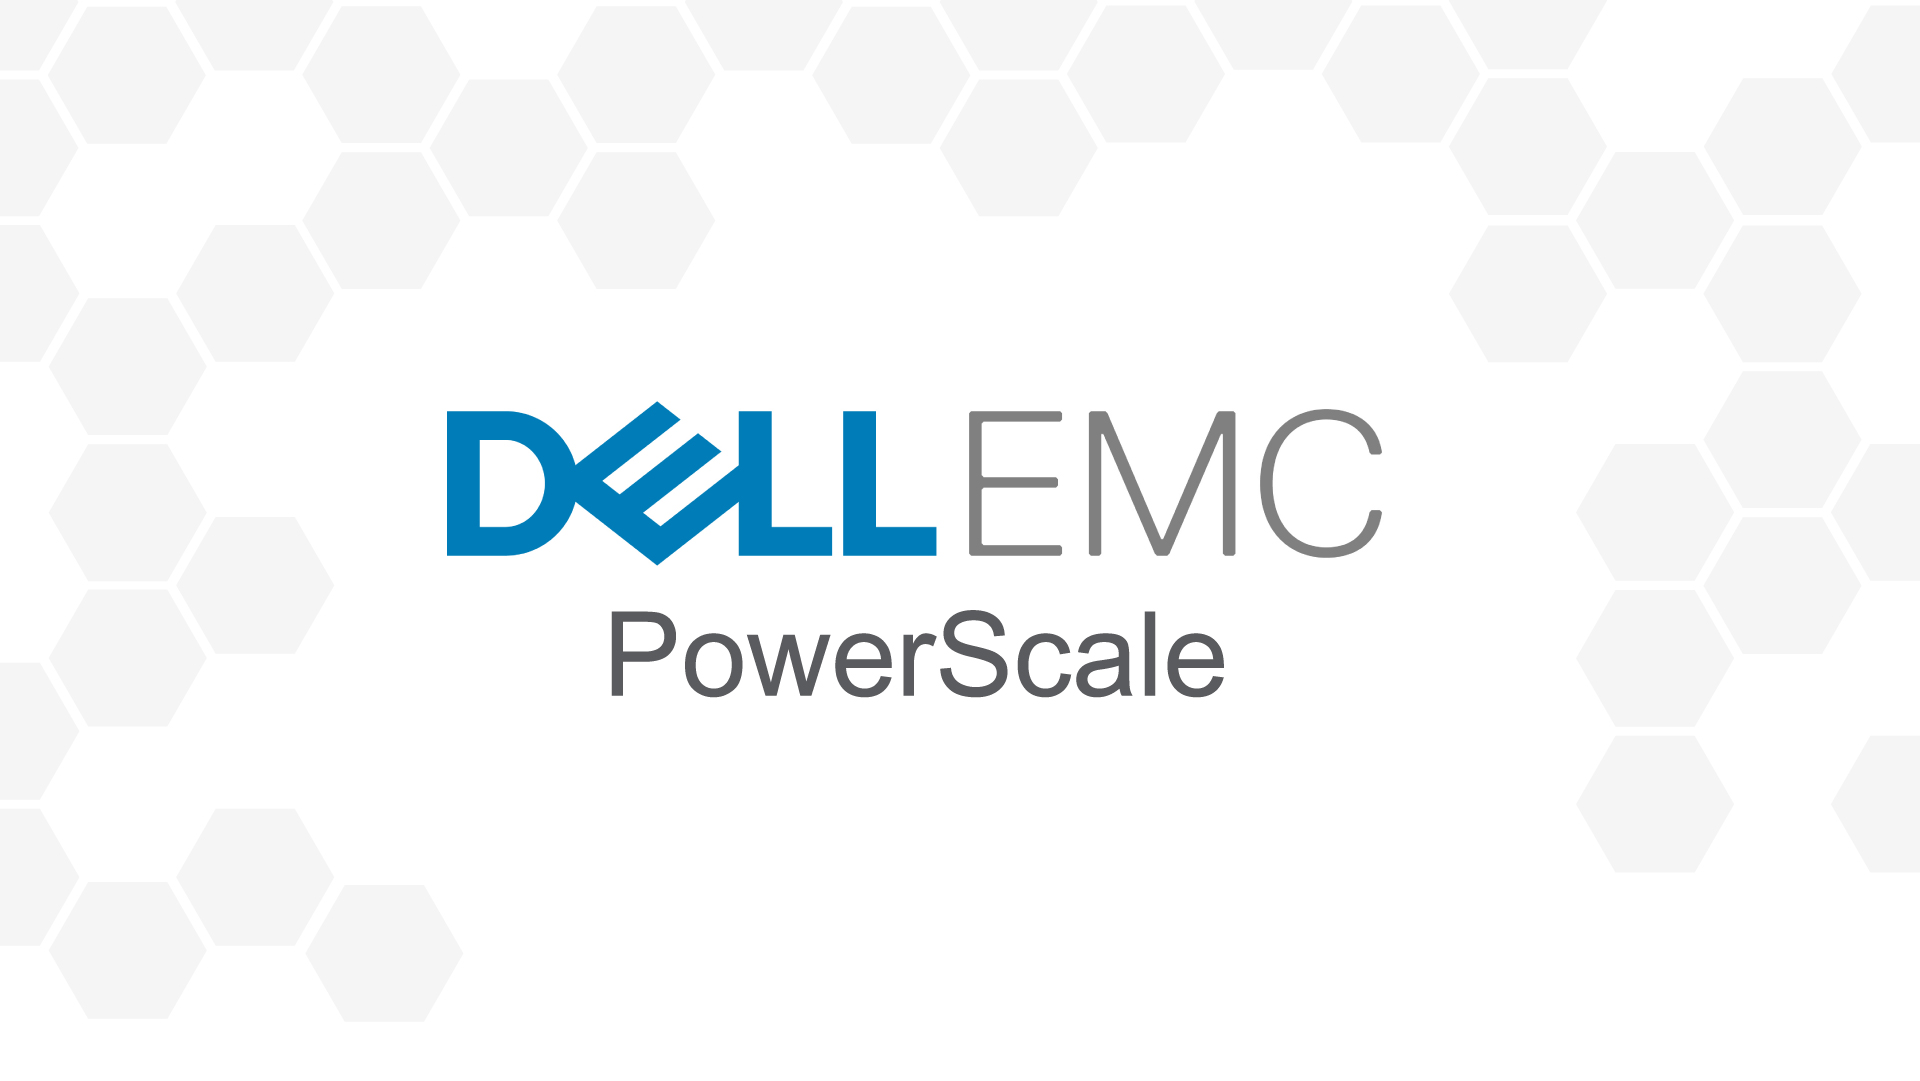 3 Reasons Why Dell EMC's PowerScale is Key For Unstructured Data